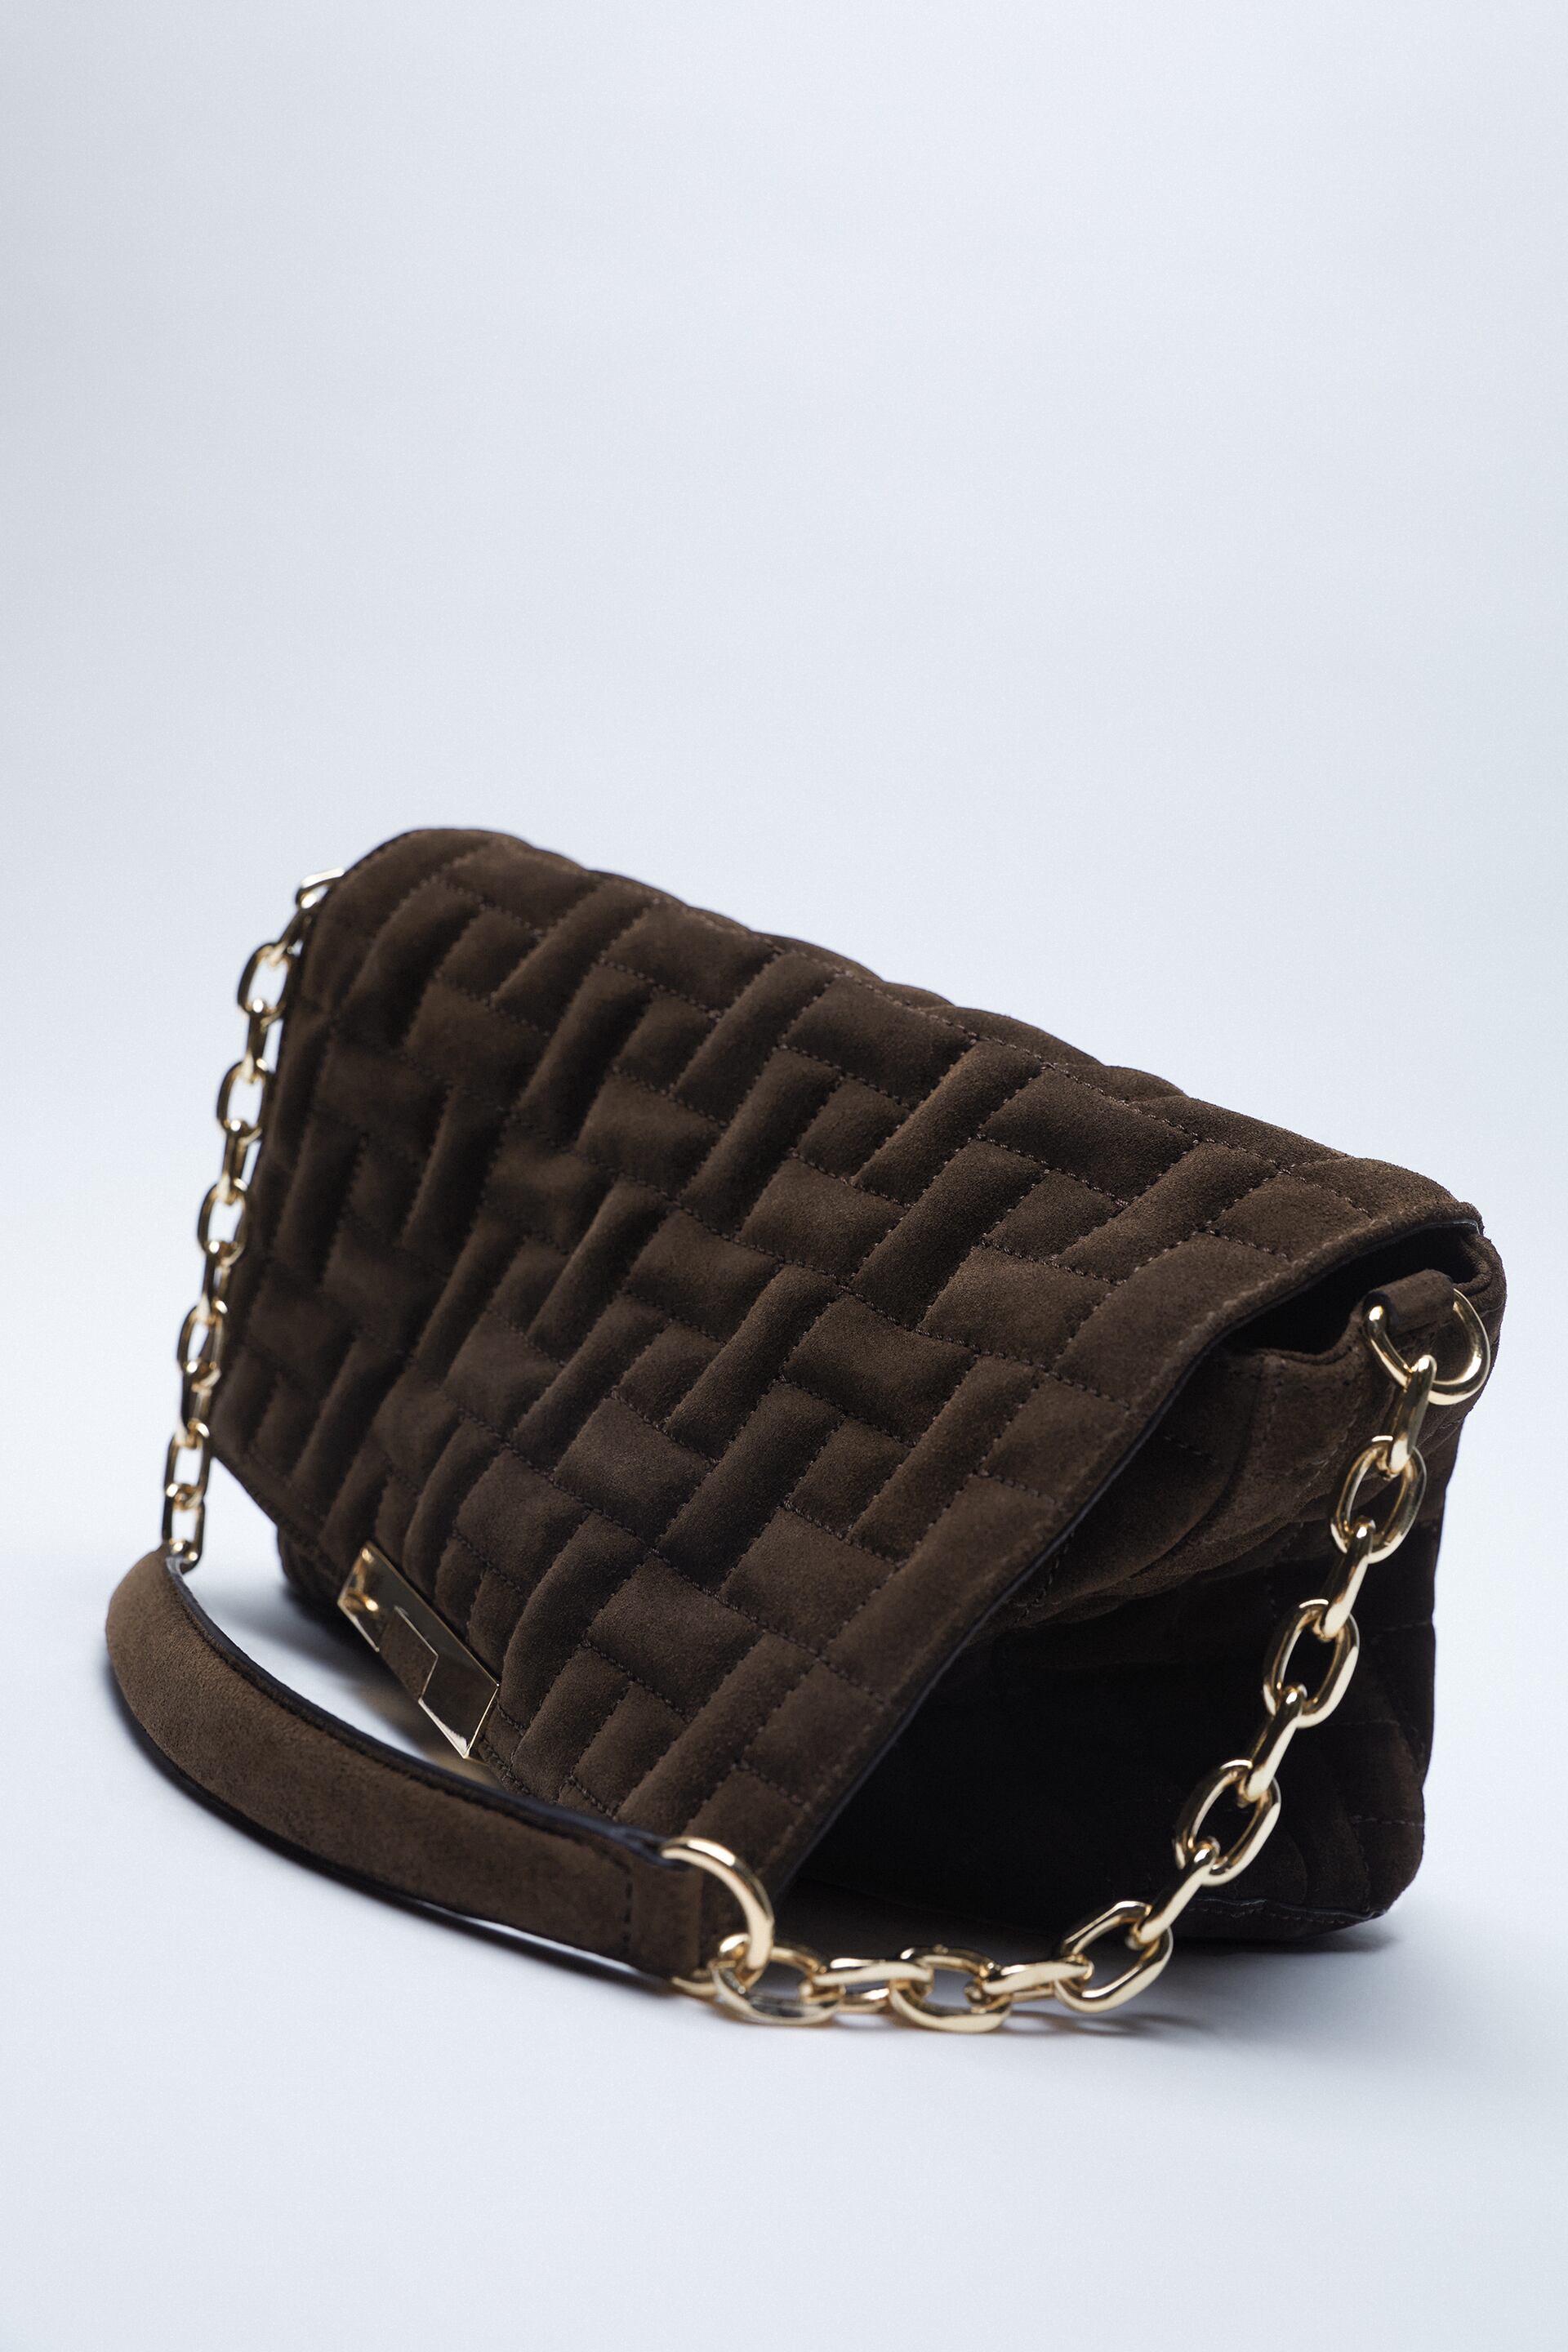 Zara QUILTED LEATHER SHOULDER BAG WITH CHAIN STRAP - 89845791-100-3